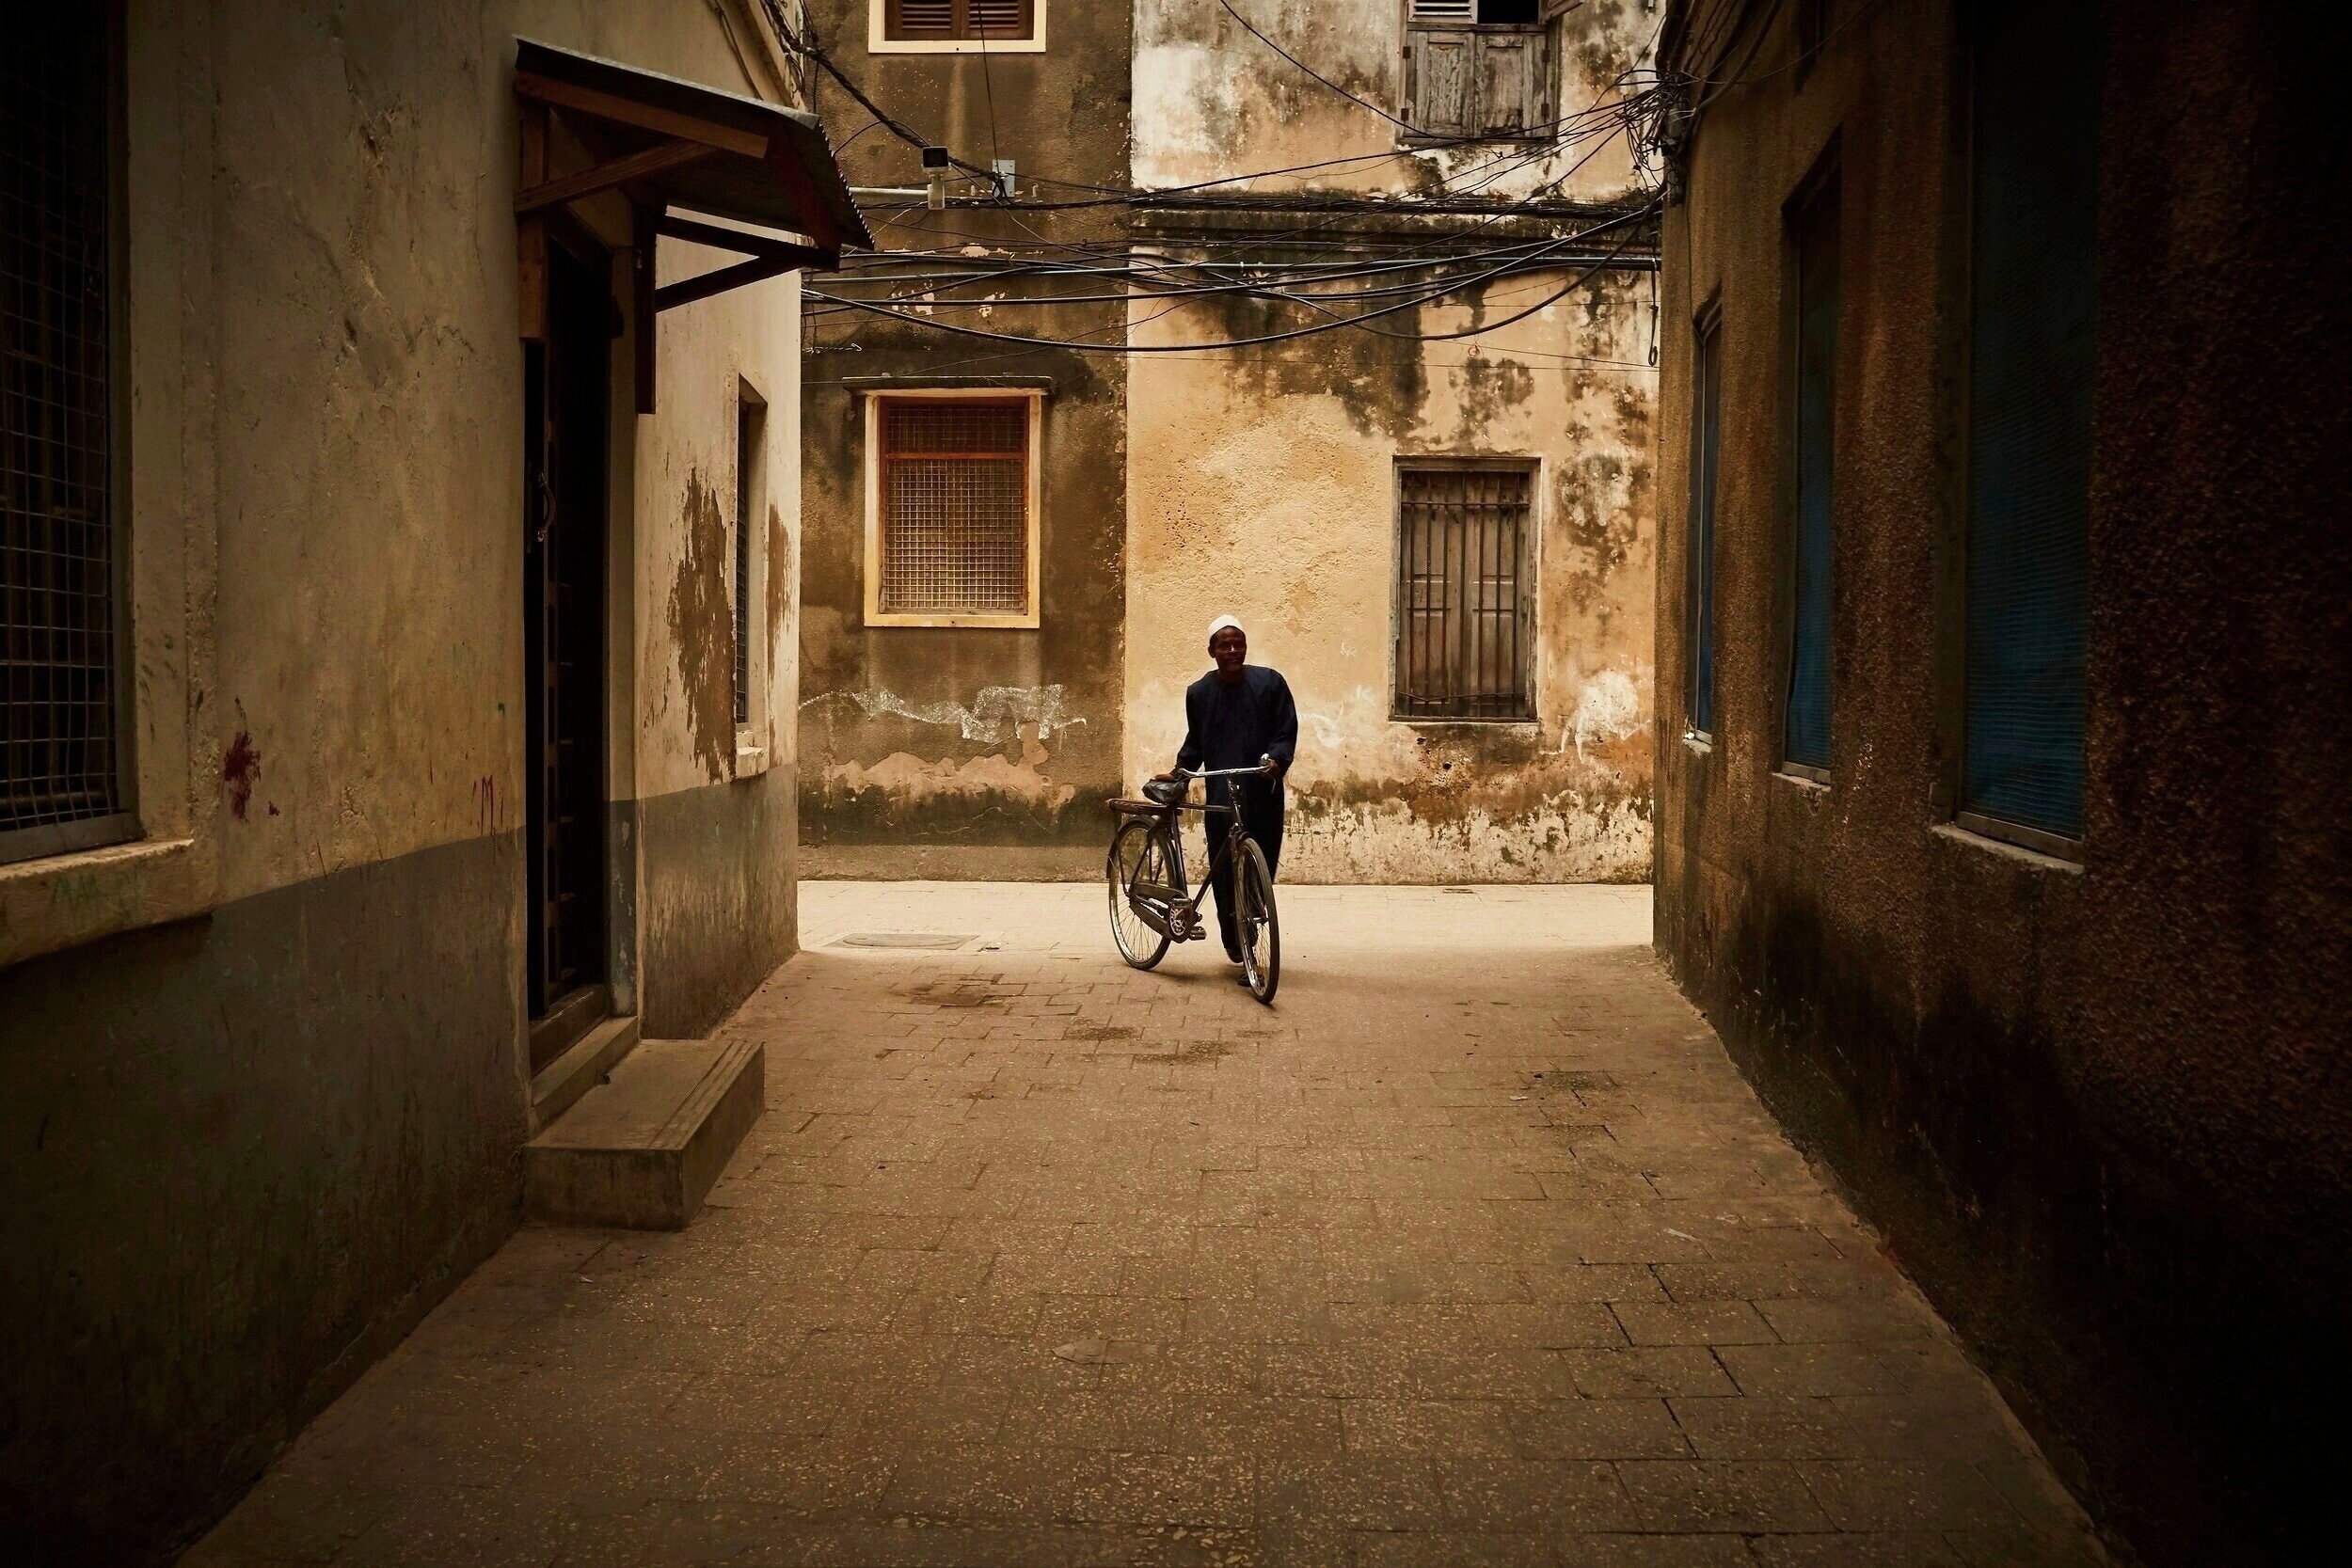   Maze-like streets built in the early 1800s. Its passageways are too narrow for any cars to traverse, so people must either walk, ride bicycles or mopeds   Stone Town, Zanzibar 